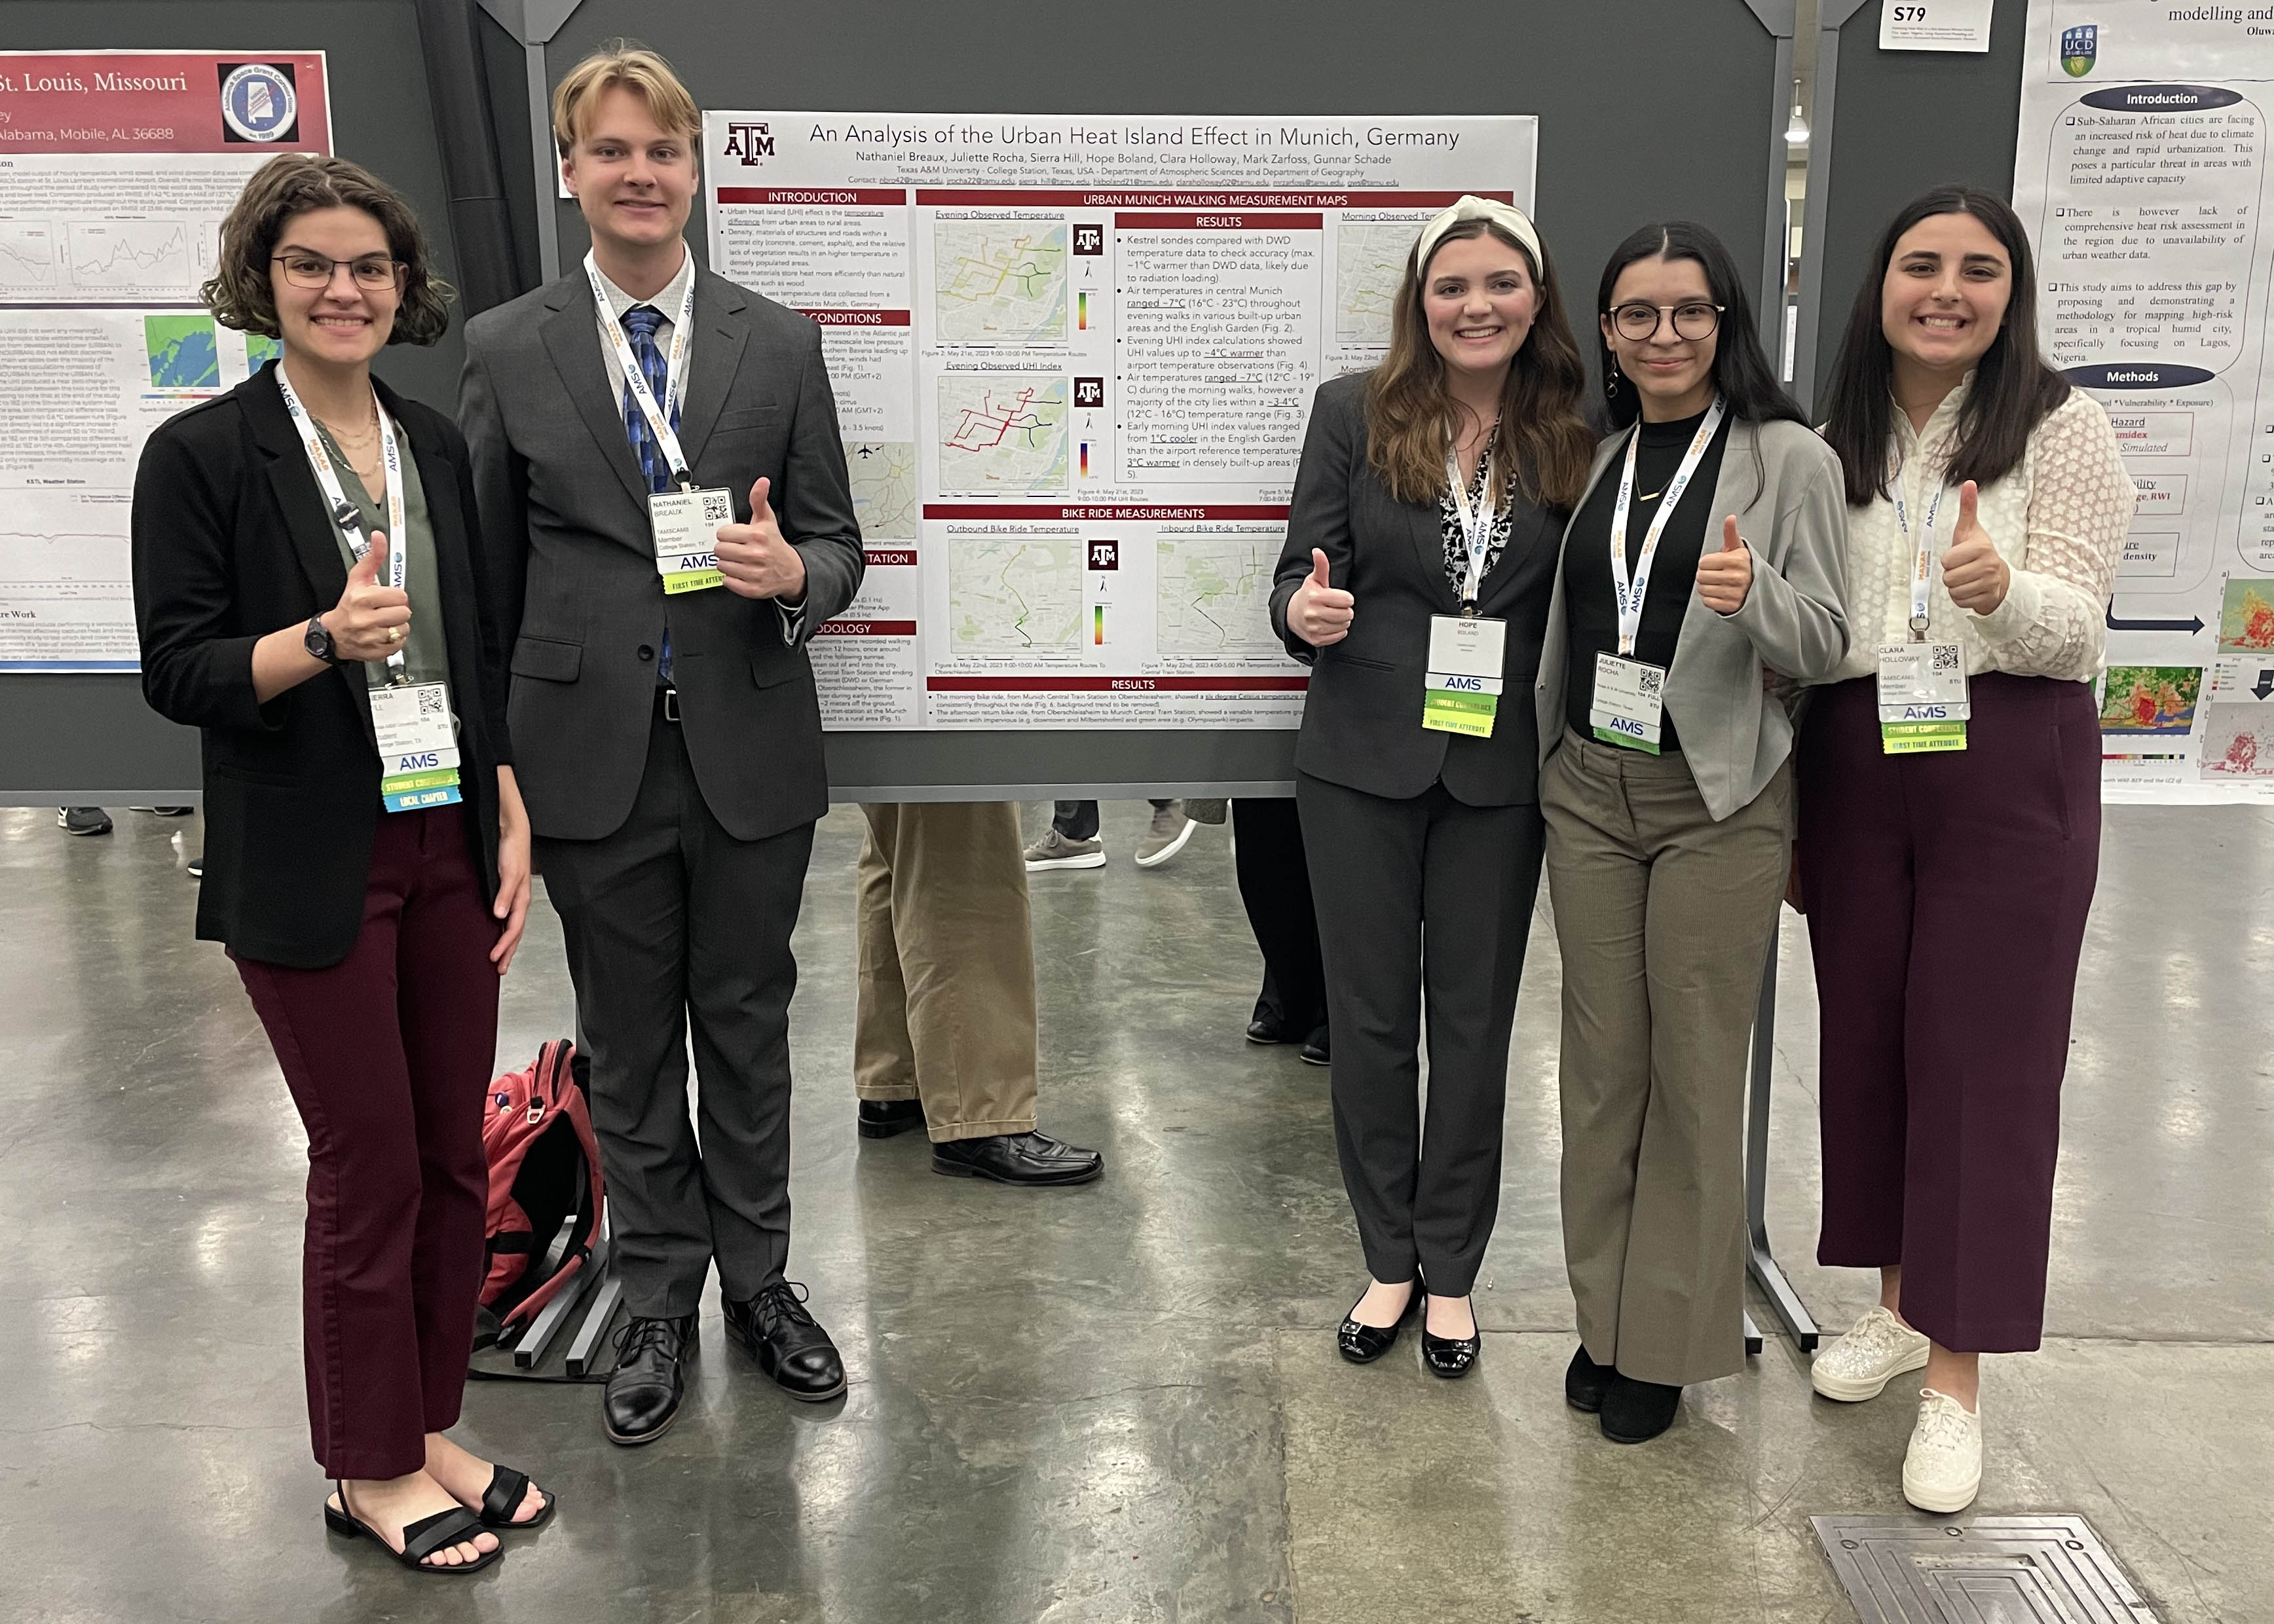 Group photo of Texas A&amp;M University undergraduate meteorology students and their award-winning poster at the 23rd Annual Student Conference for the American Meteorology Society